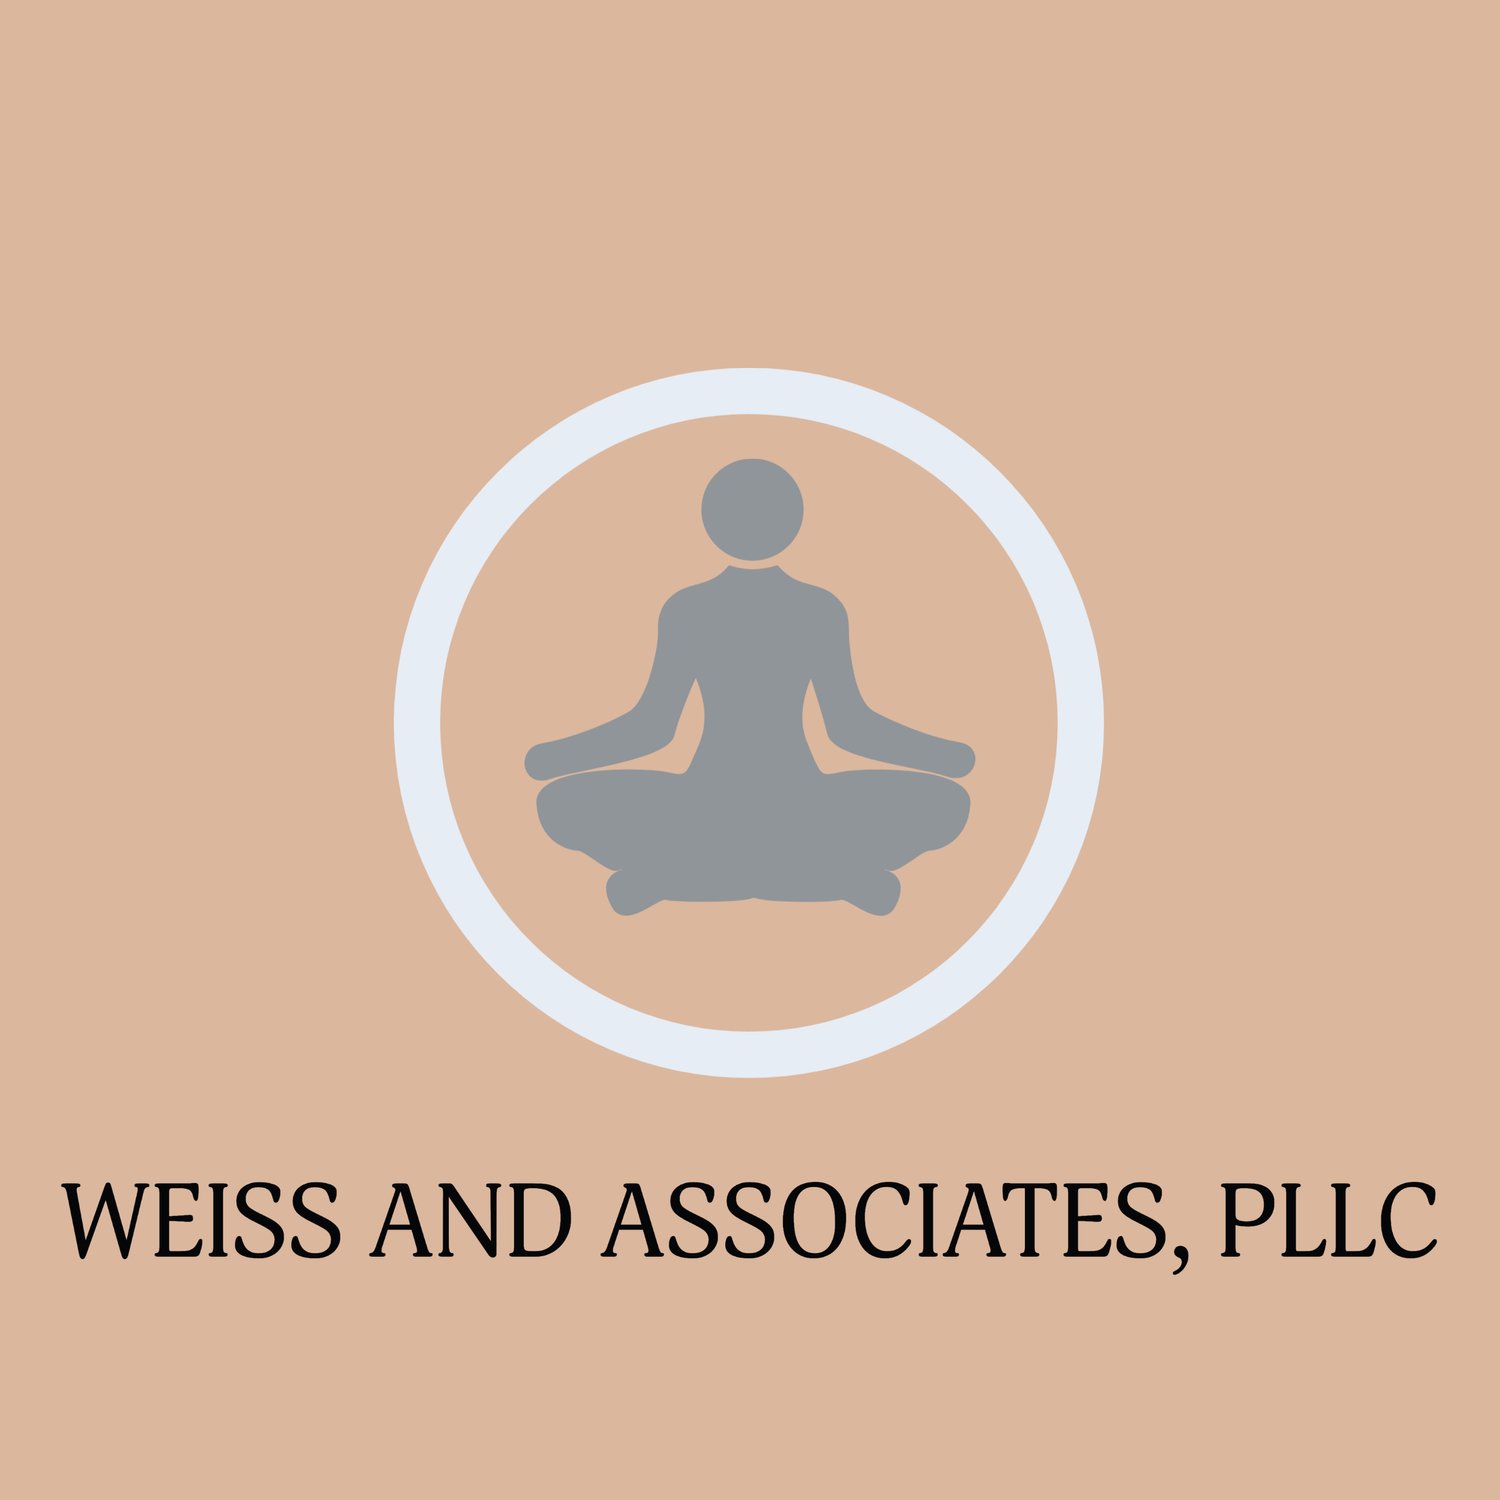 Weiss and Associates, PLLC